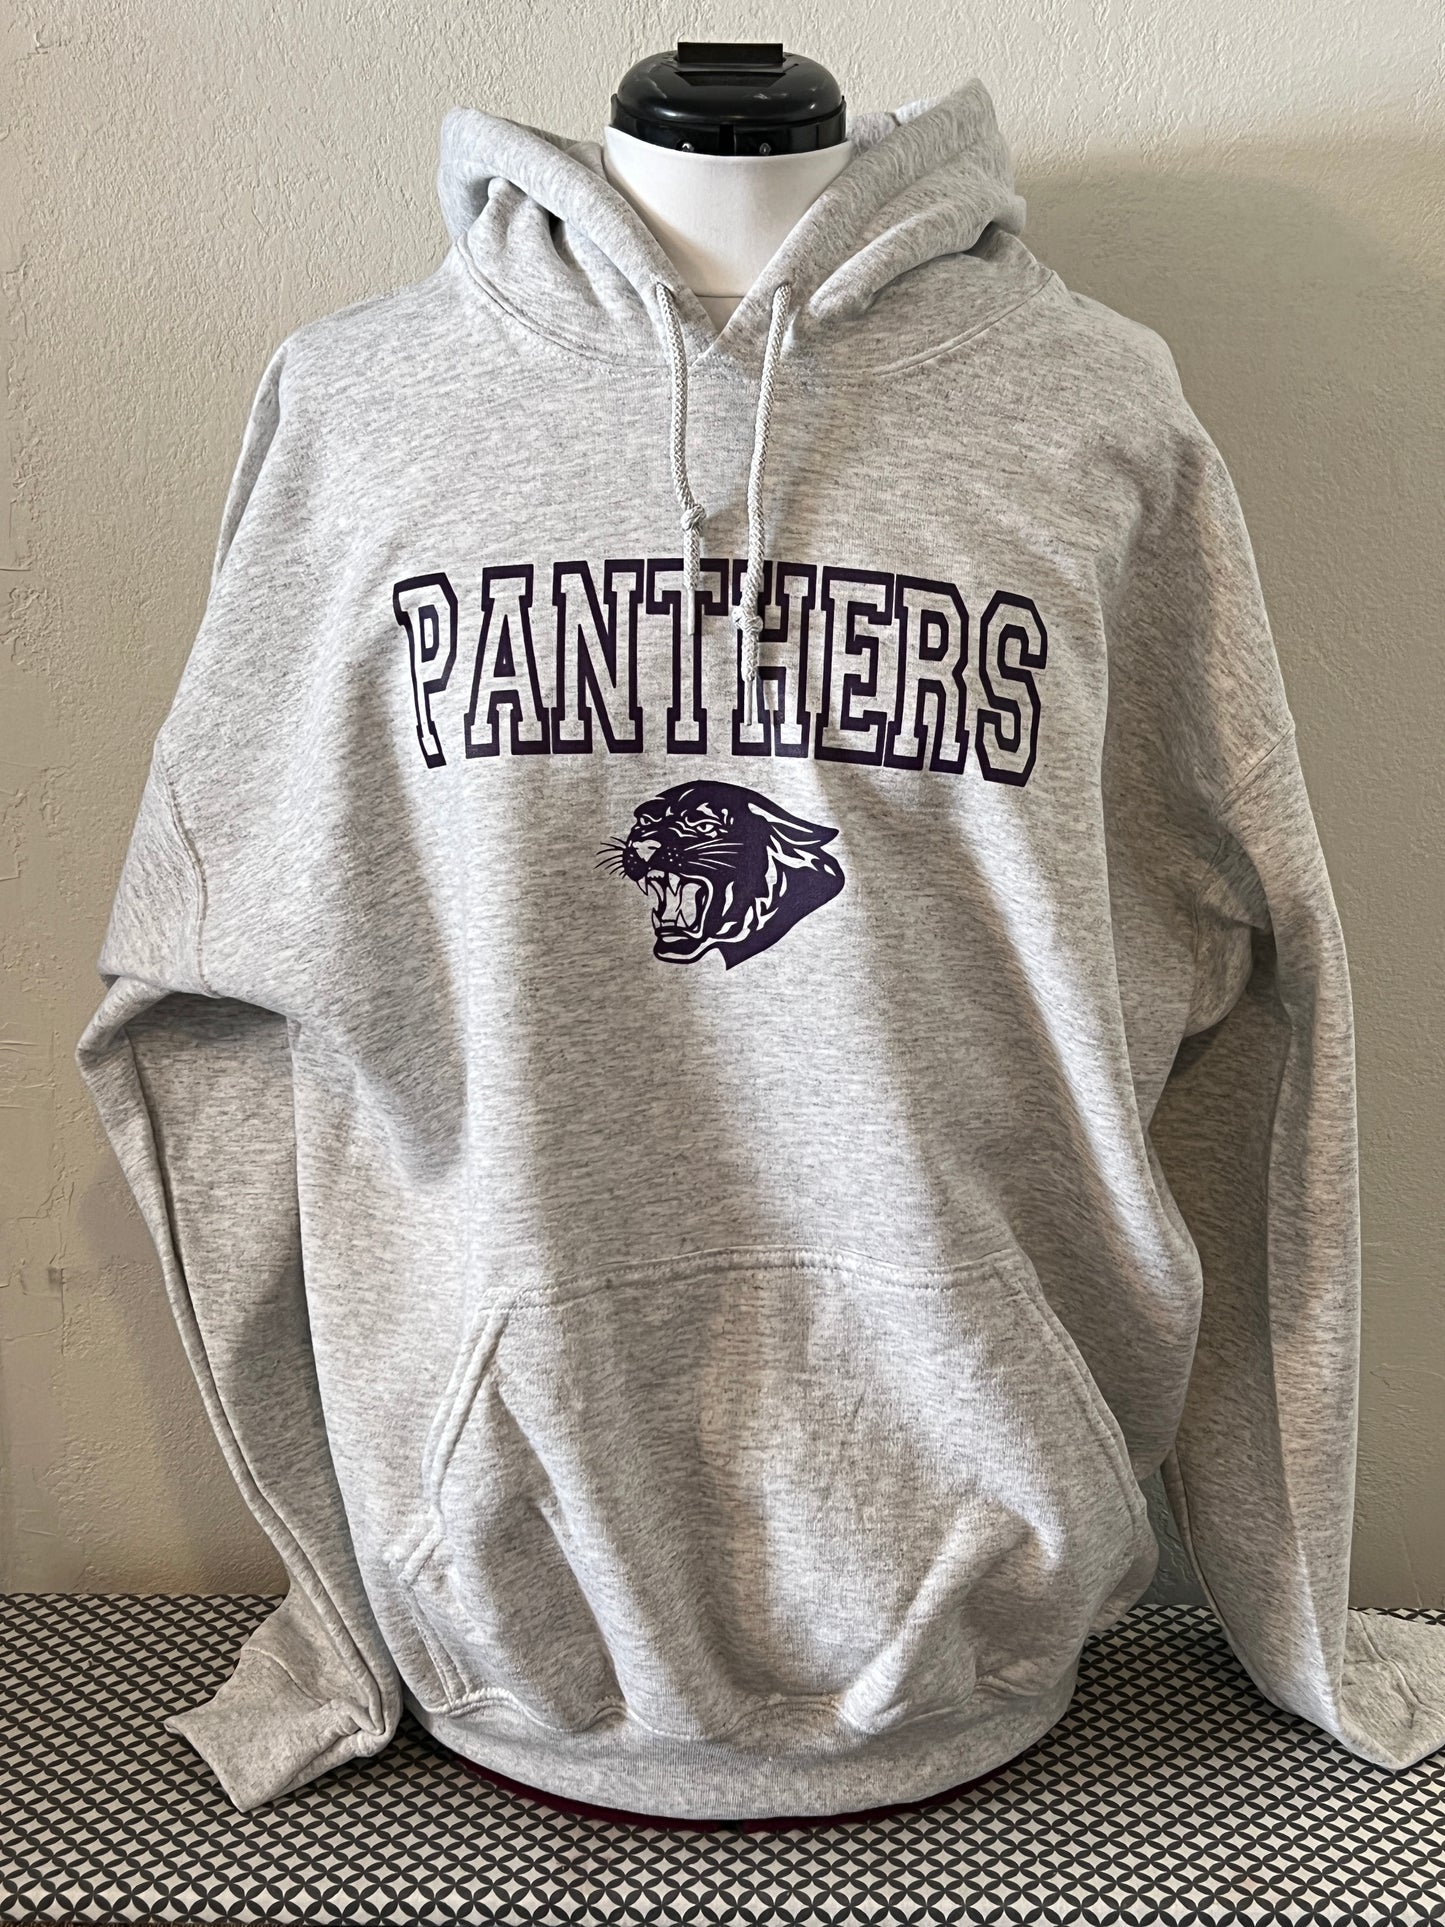 Lake County Panther Top – Jen’s Gems & More